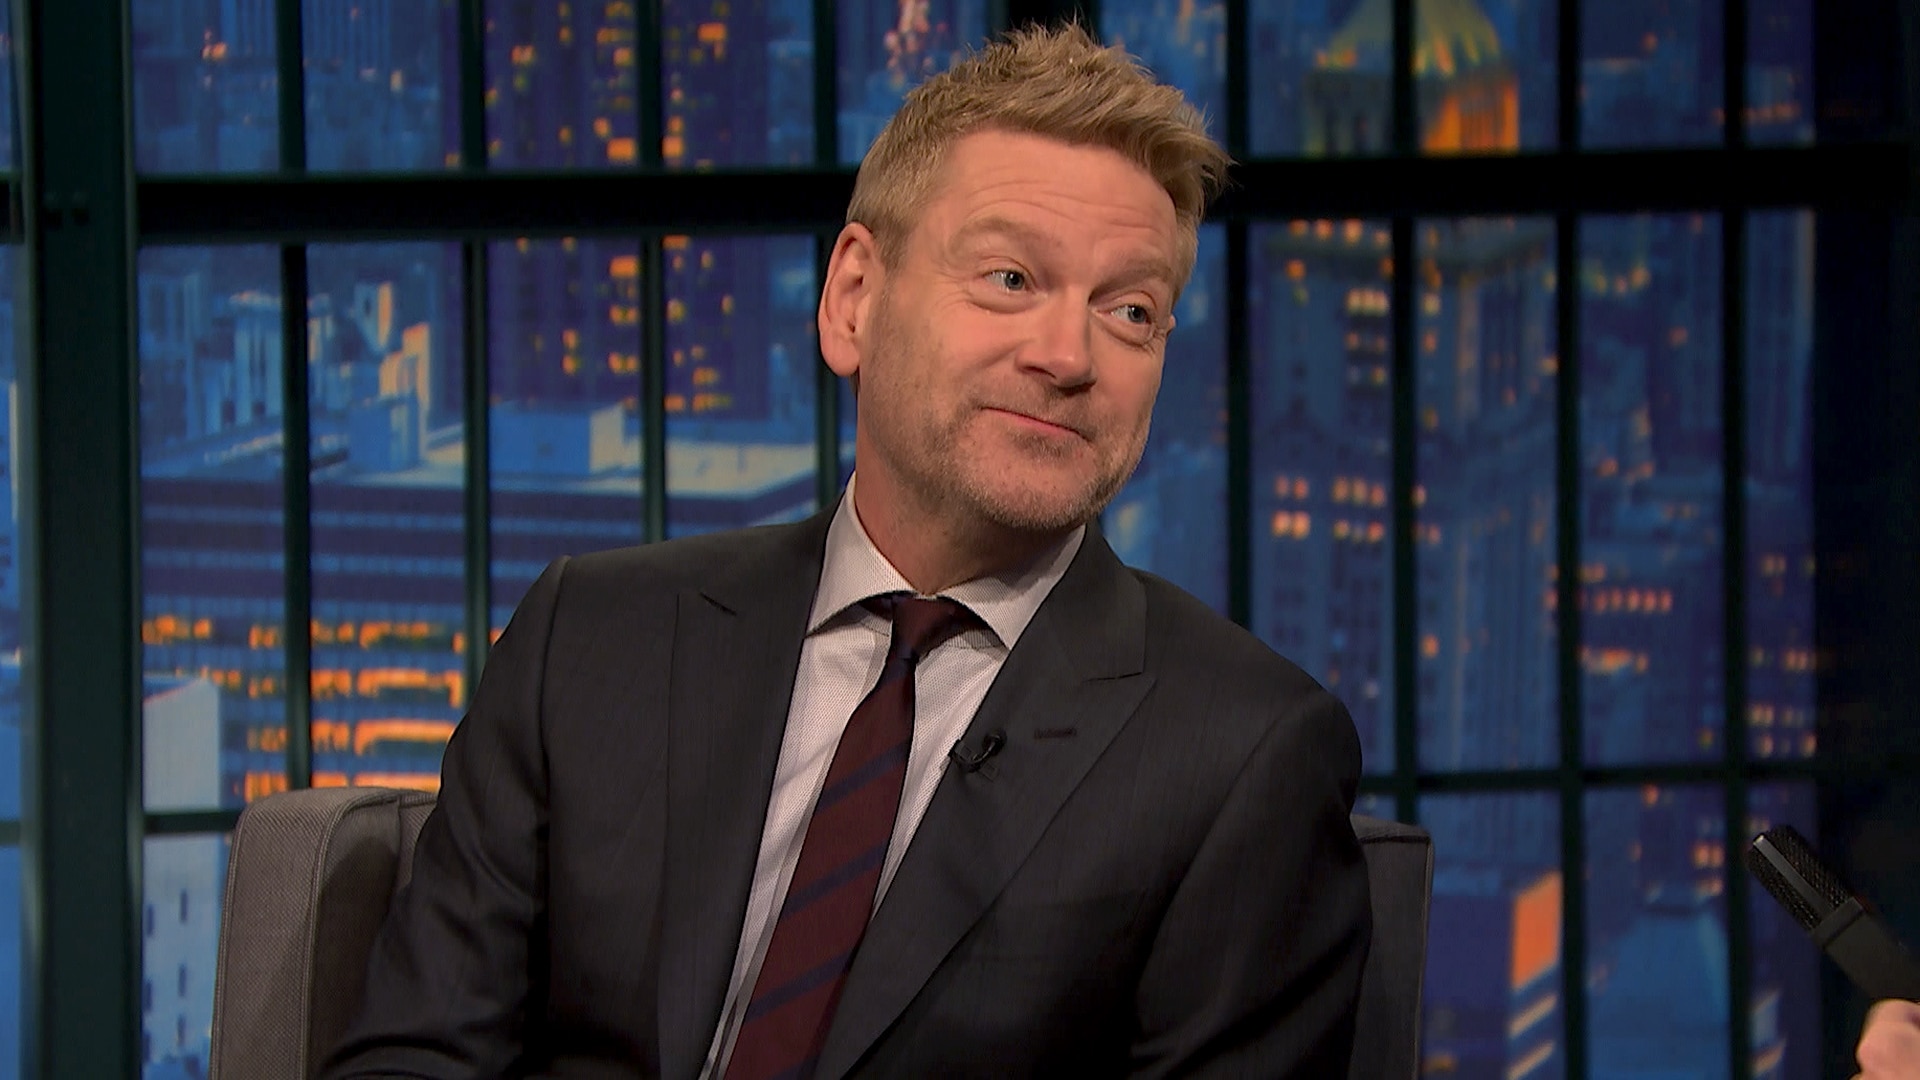 Watch Late Night with Seth Meyers Episode: Kenneth Branagh, Felicity Huffman, Purity ...1920 x 1080